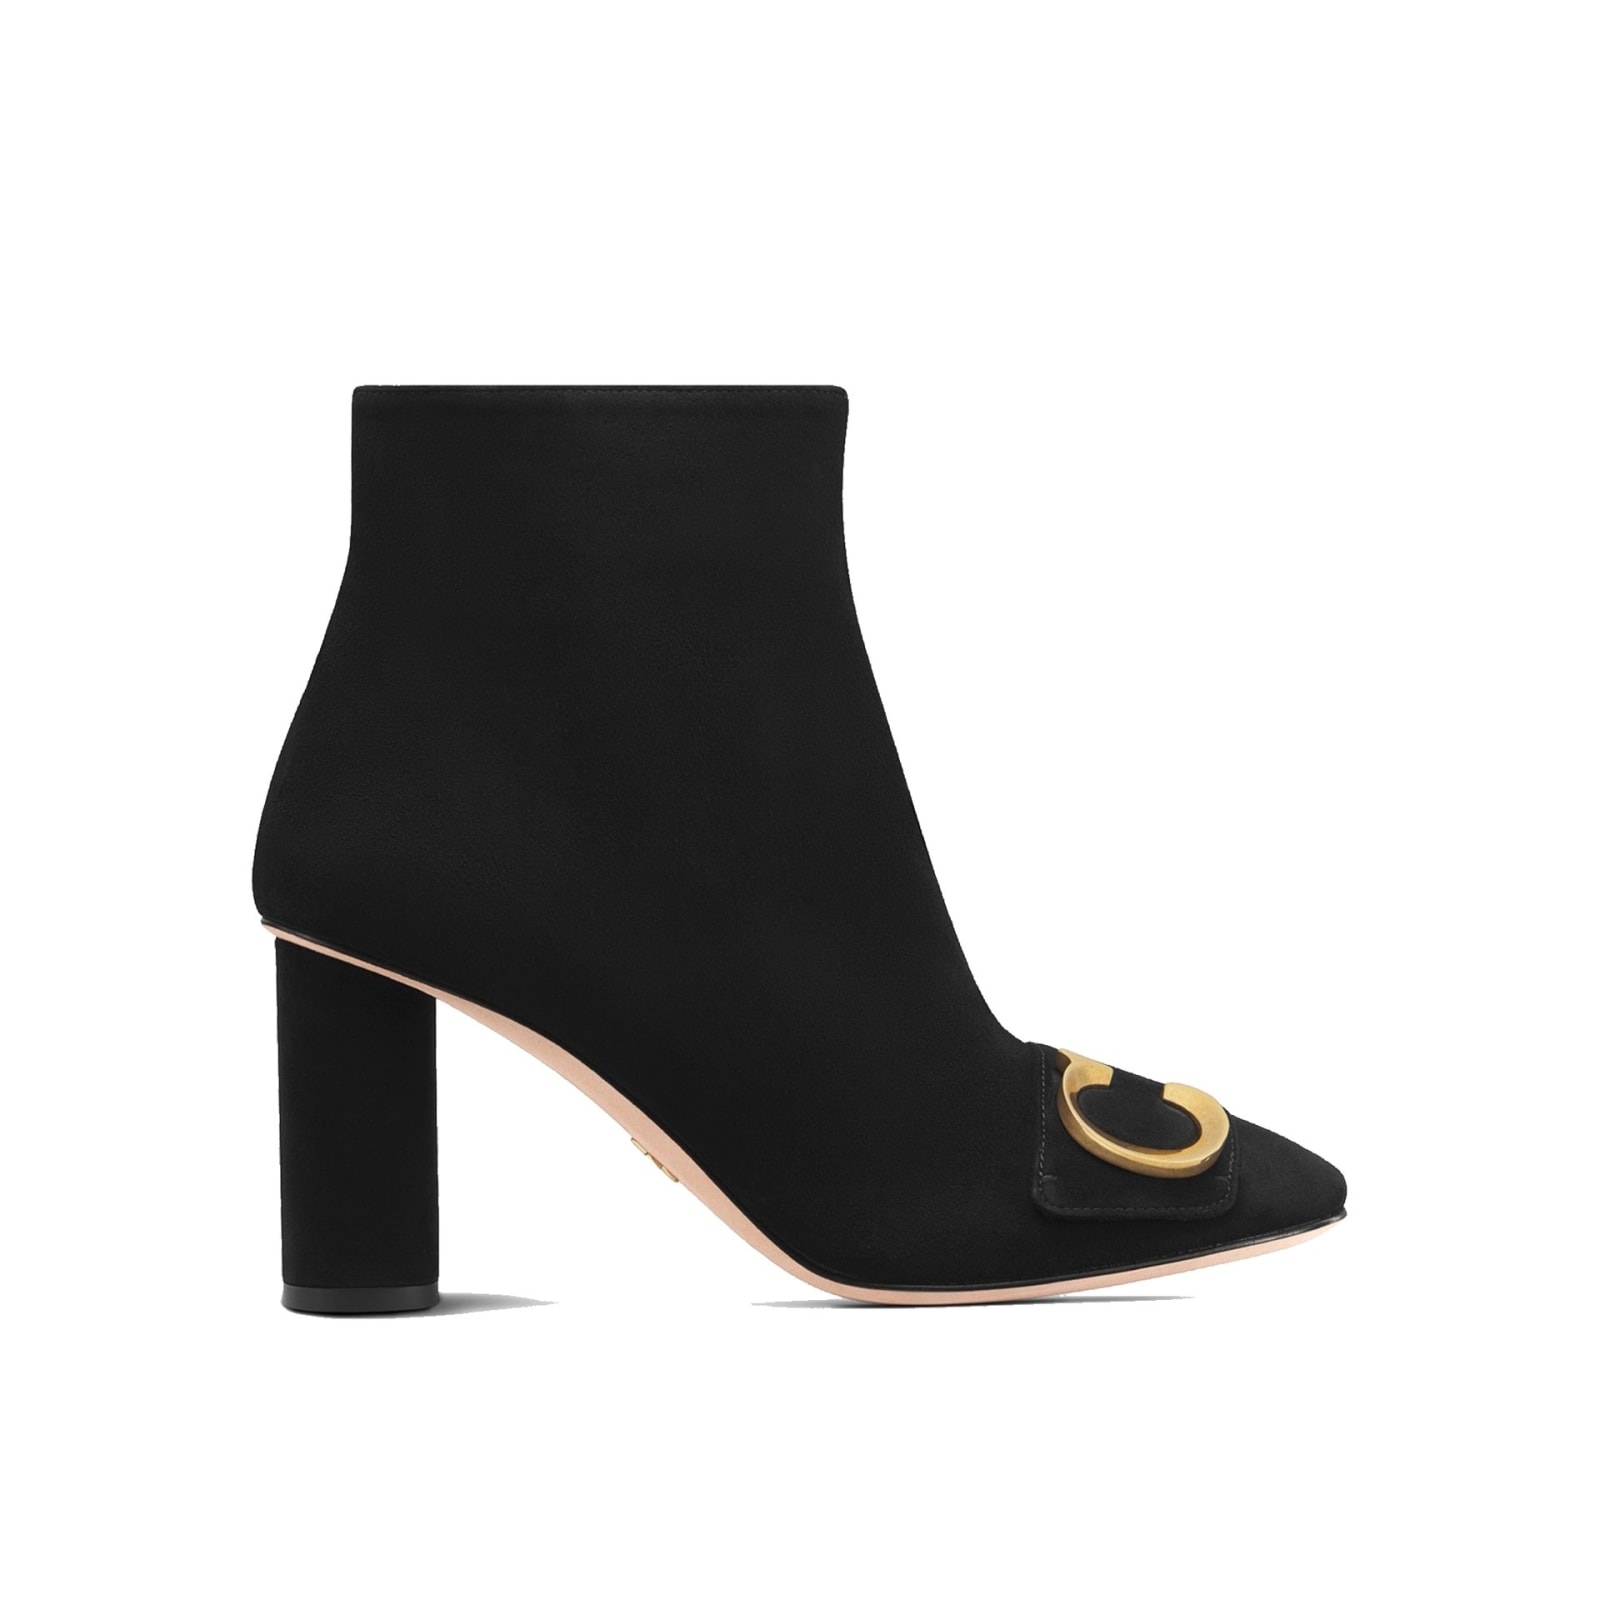 Shop Dior Cest Ankle Boots In Black